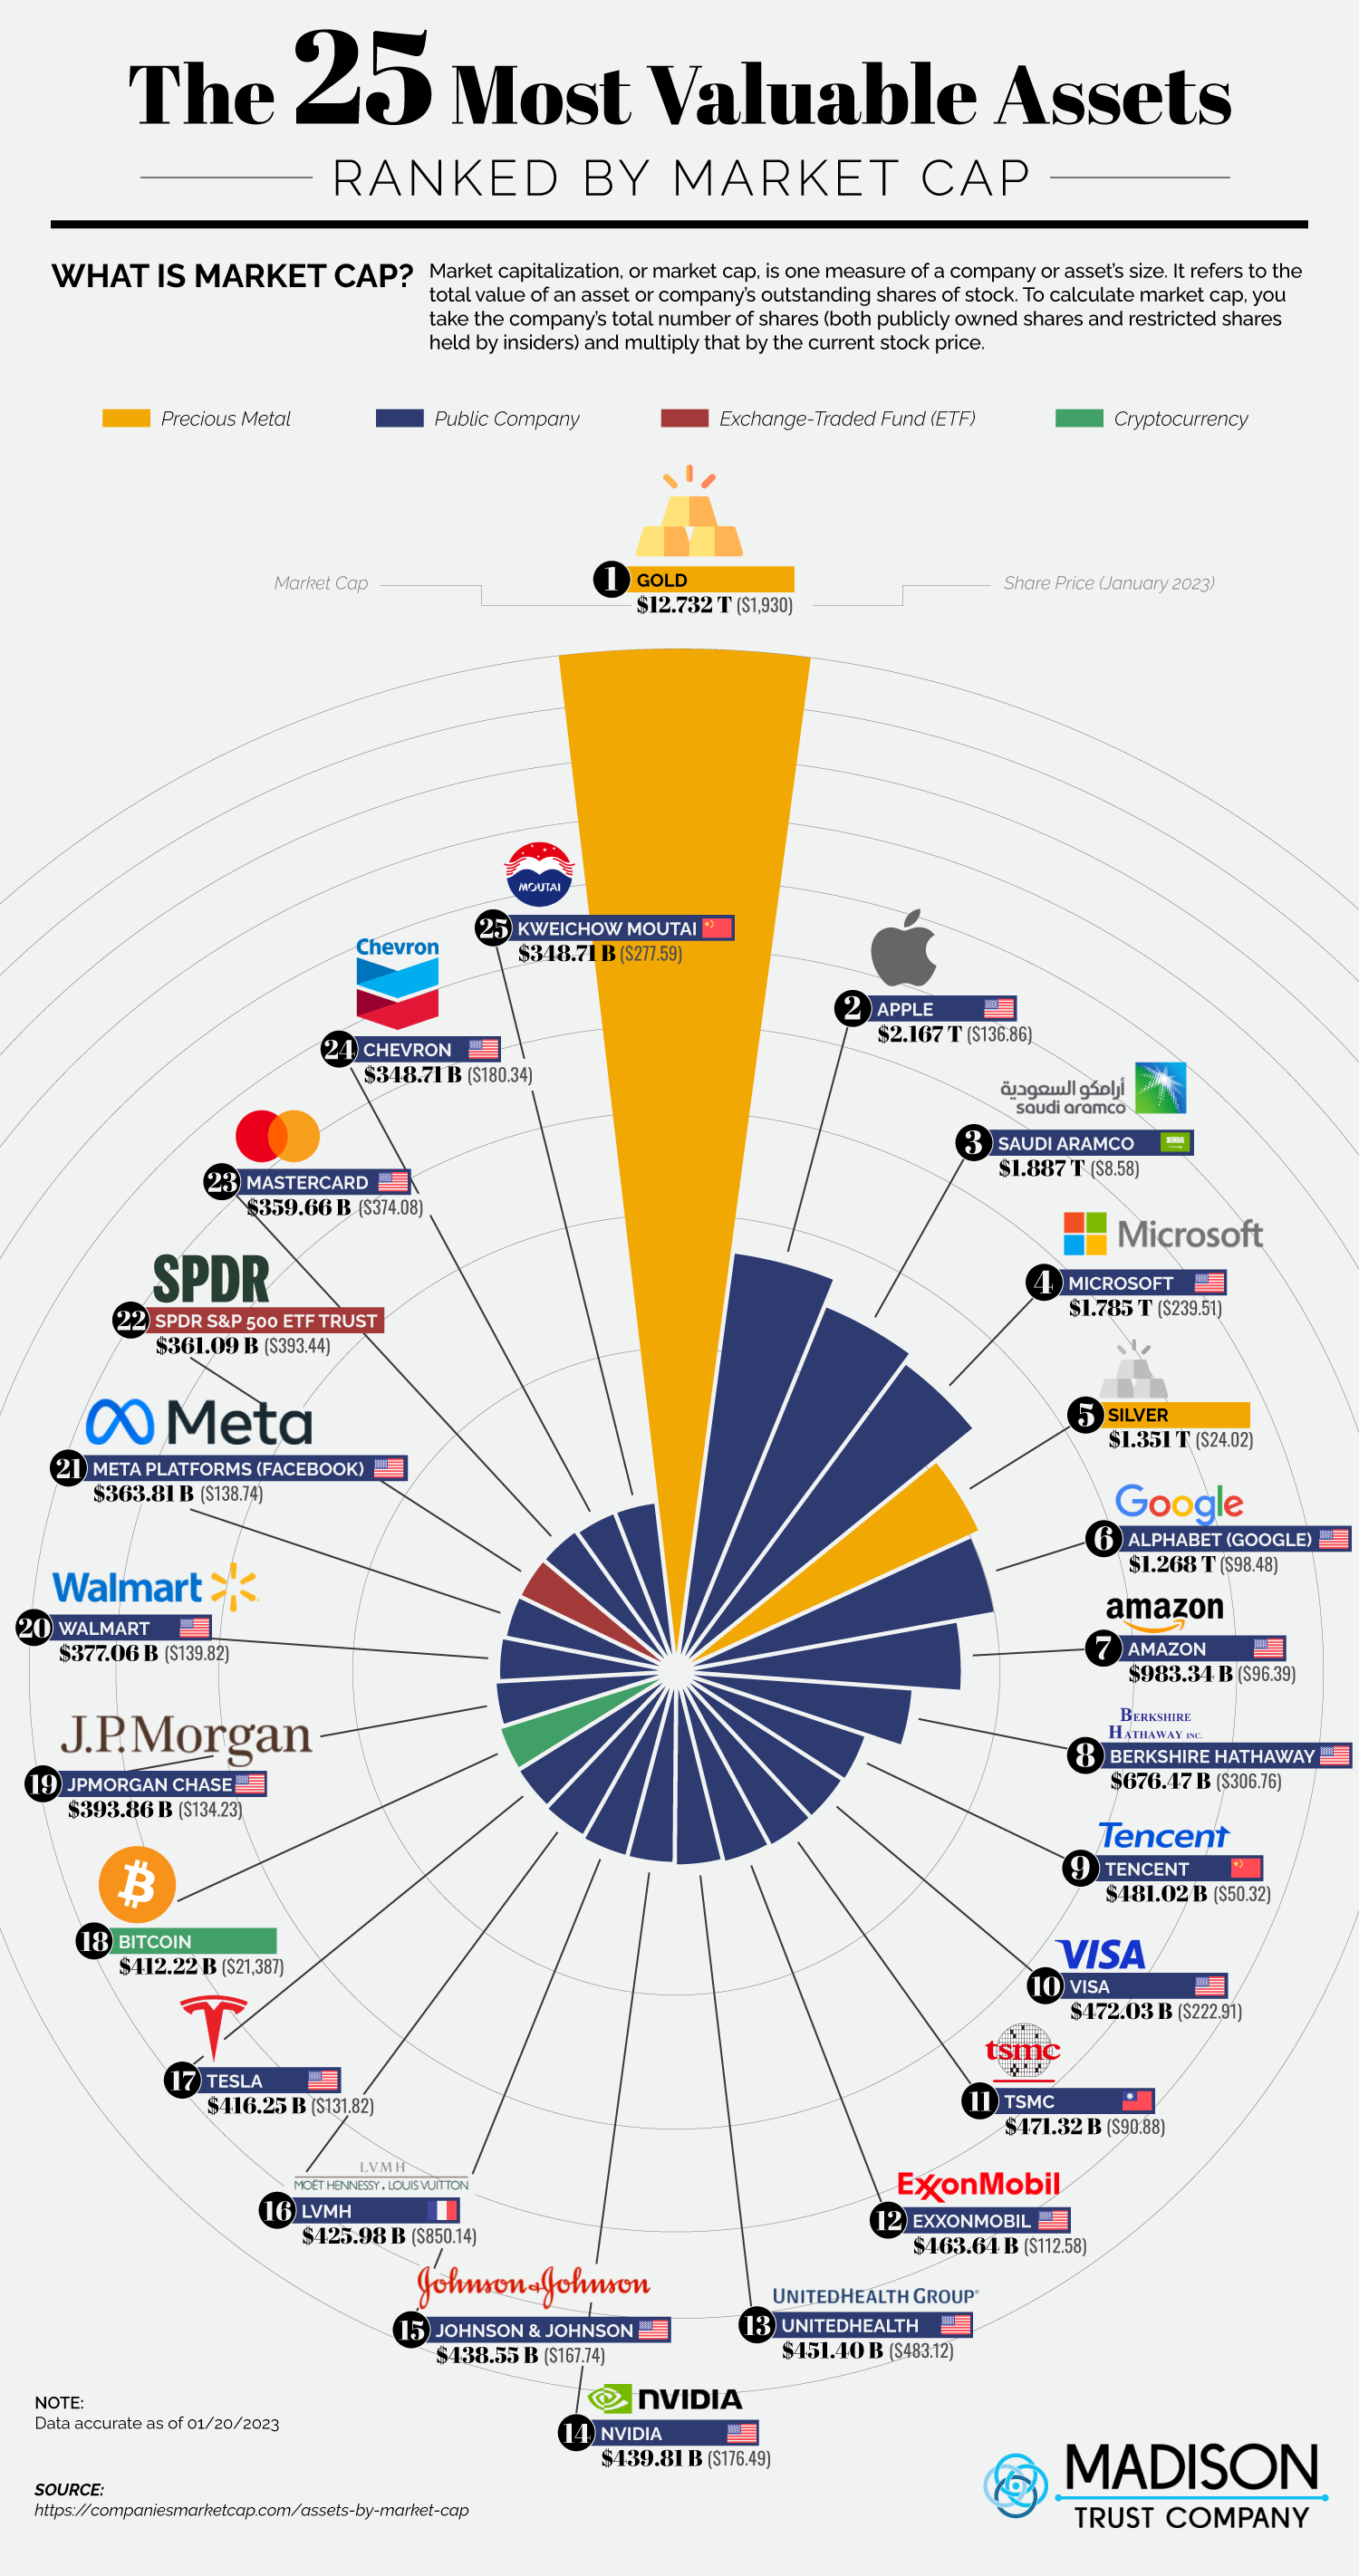 The 25 Most Valuable Assets Ranked by Market Cap - Choose the Best